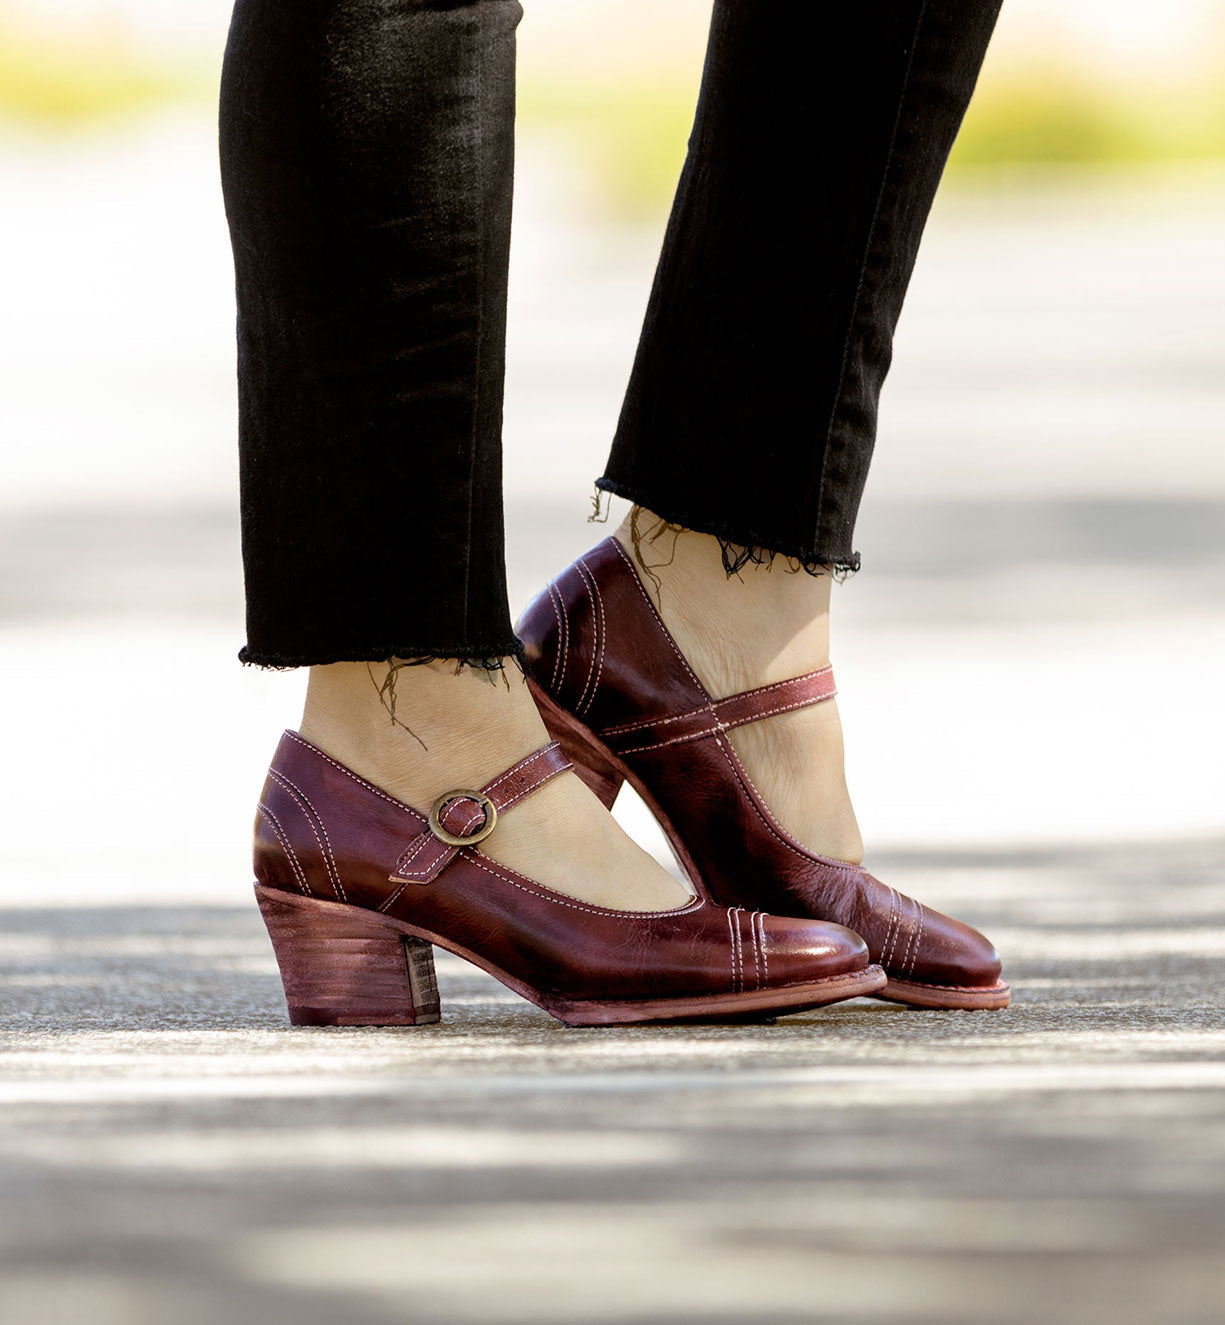 A woman wearing a pair of burgundy Oak Tree Farms mary jane shoes in Twigley style.